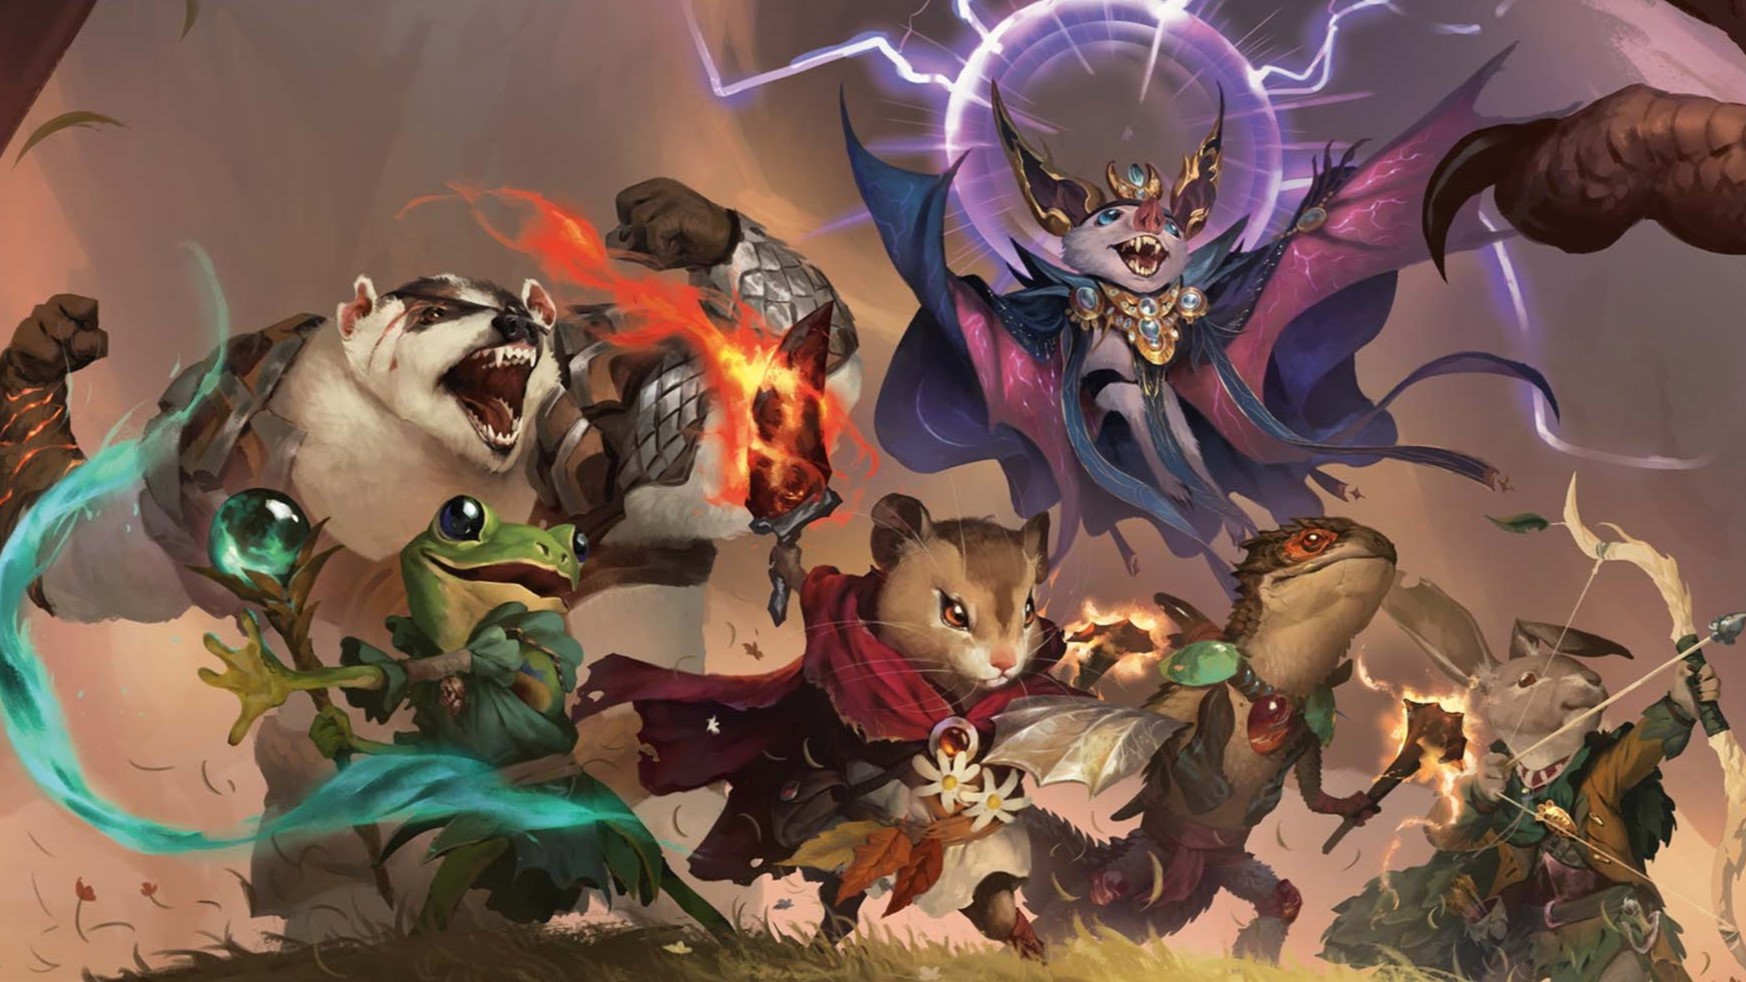 art of badger, frog, mouse, lizard, bat, and mouse heroes from MTG Bloomburrow